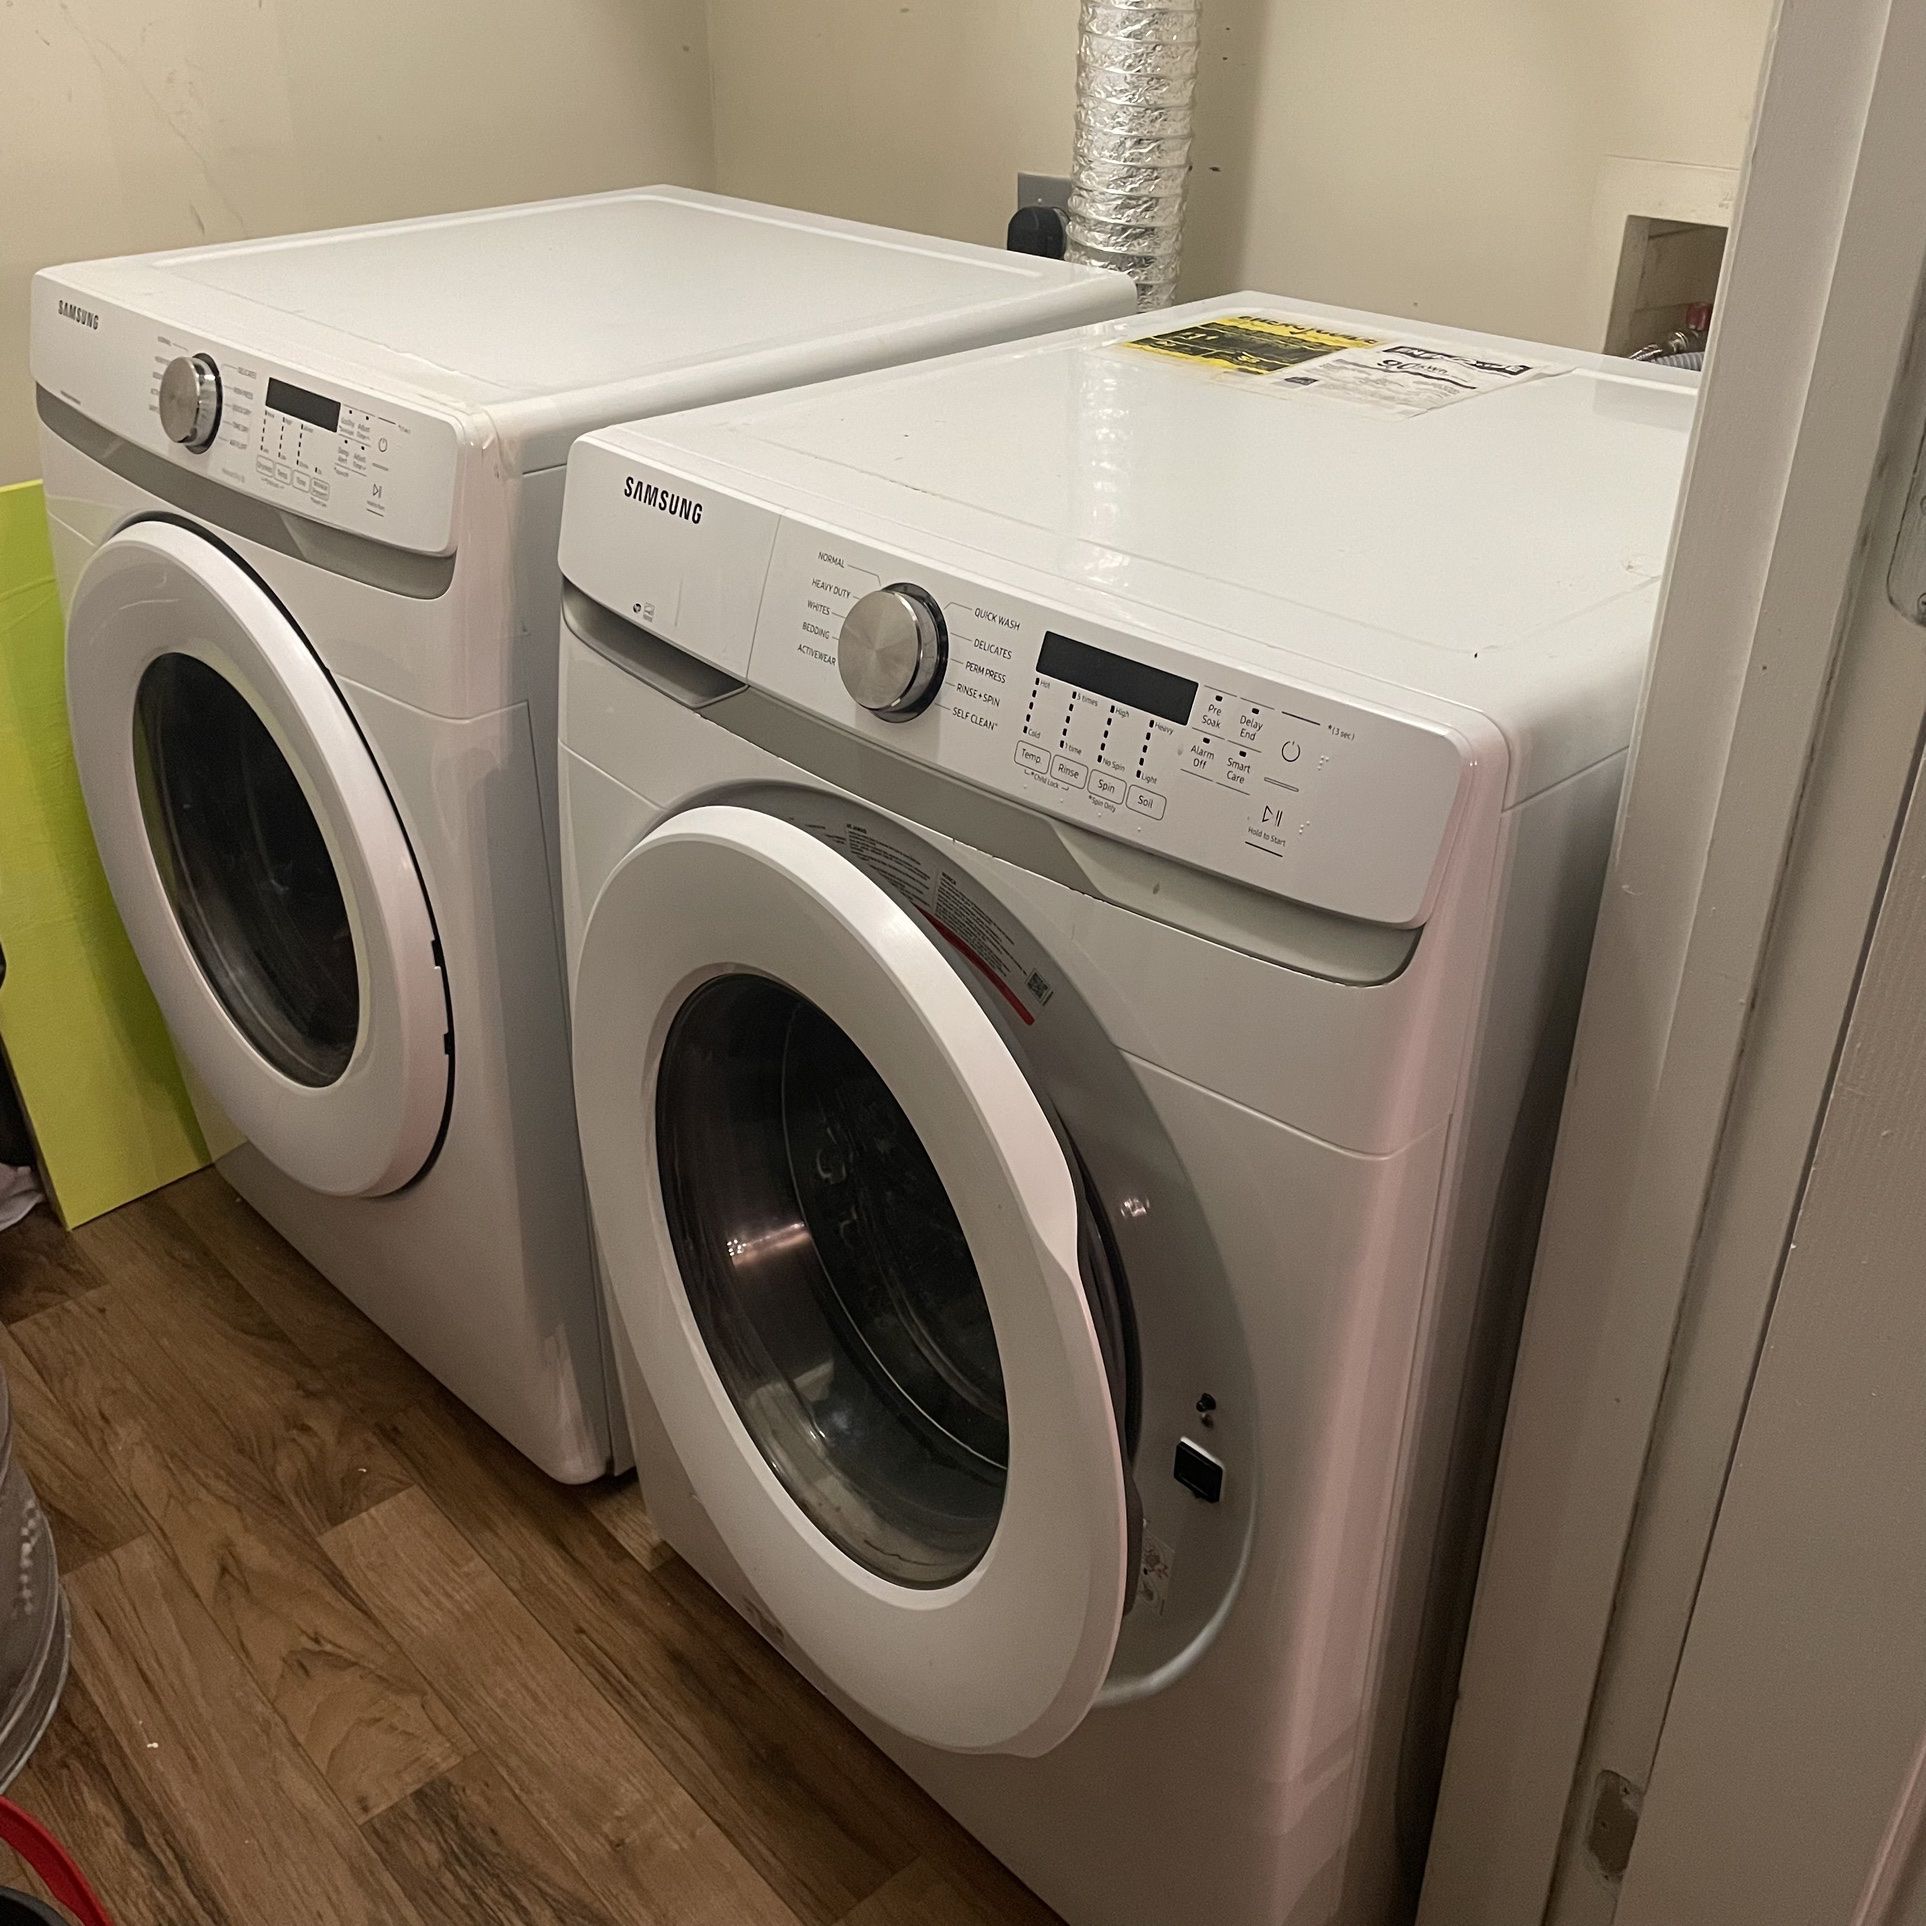 Samsung Energy Efficient Washer and dryer